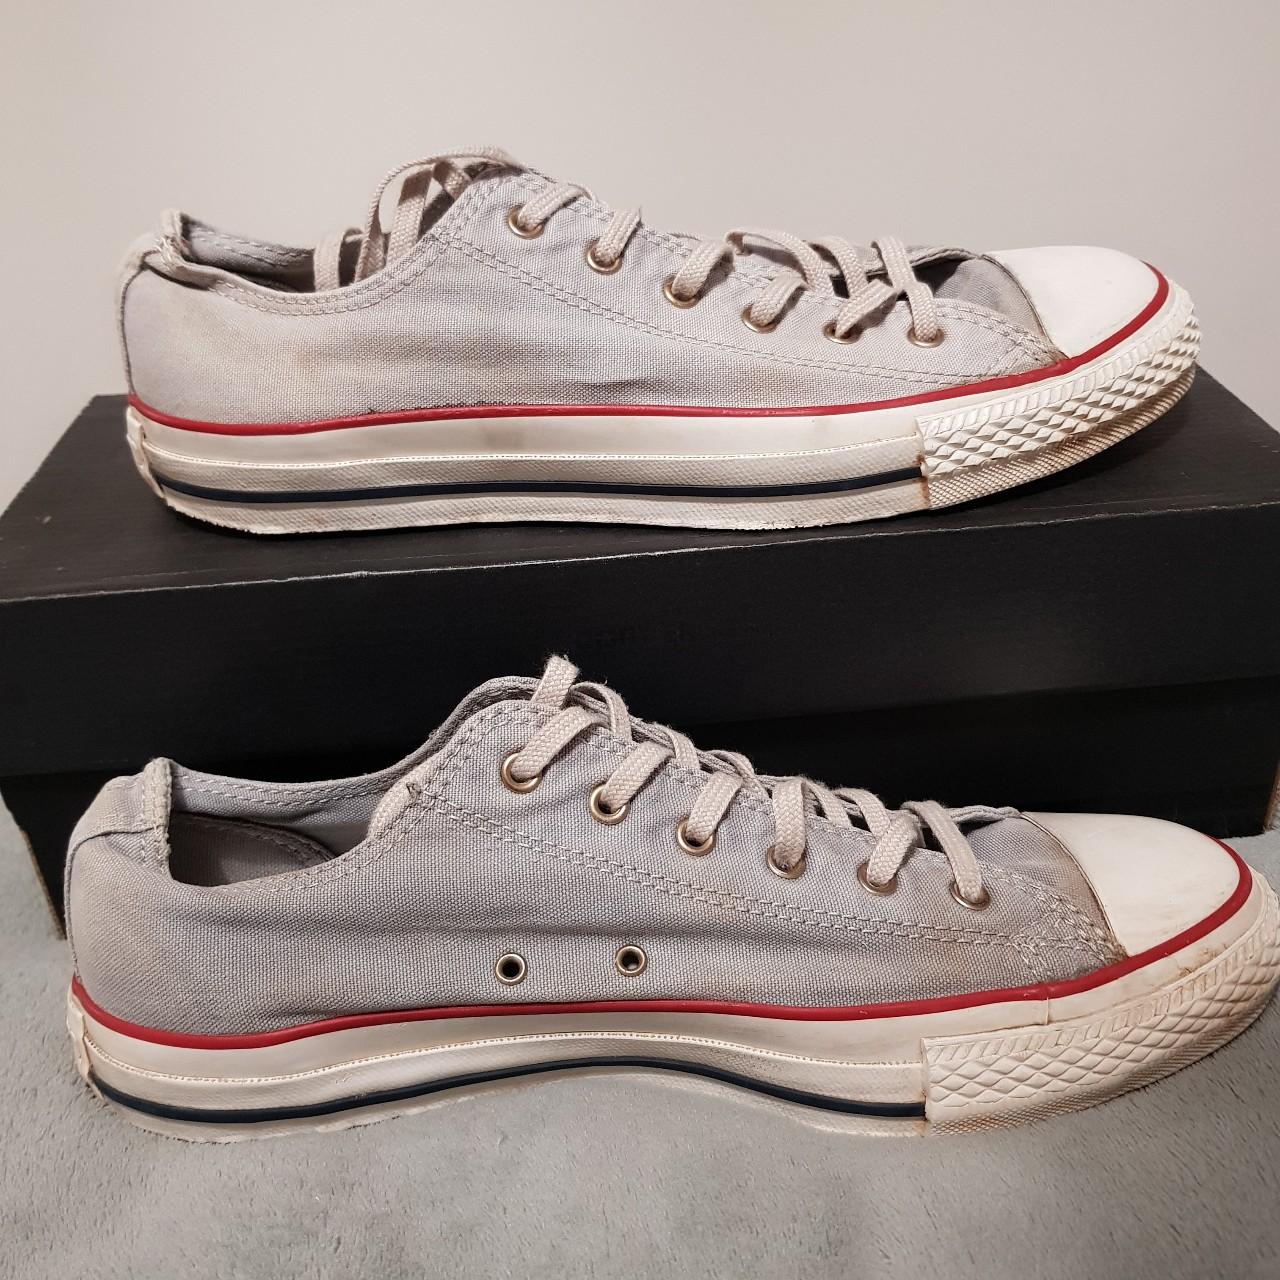 Neuropathie cafetaria Sicilië CONVERSE 'WELL WORN' COLLECTION GREY Size 7 THESE... - Depop